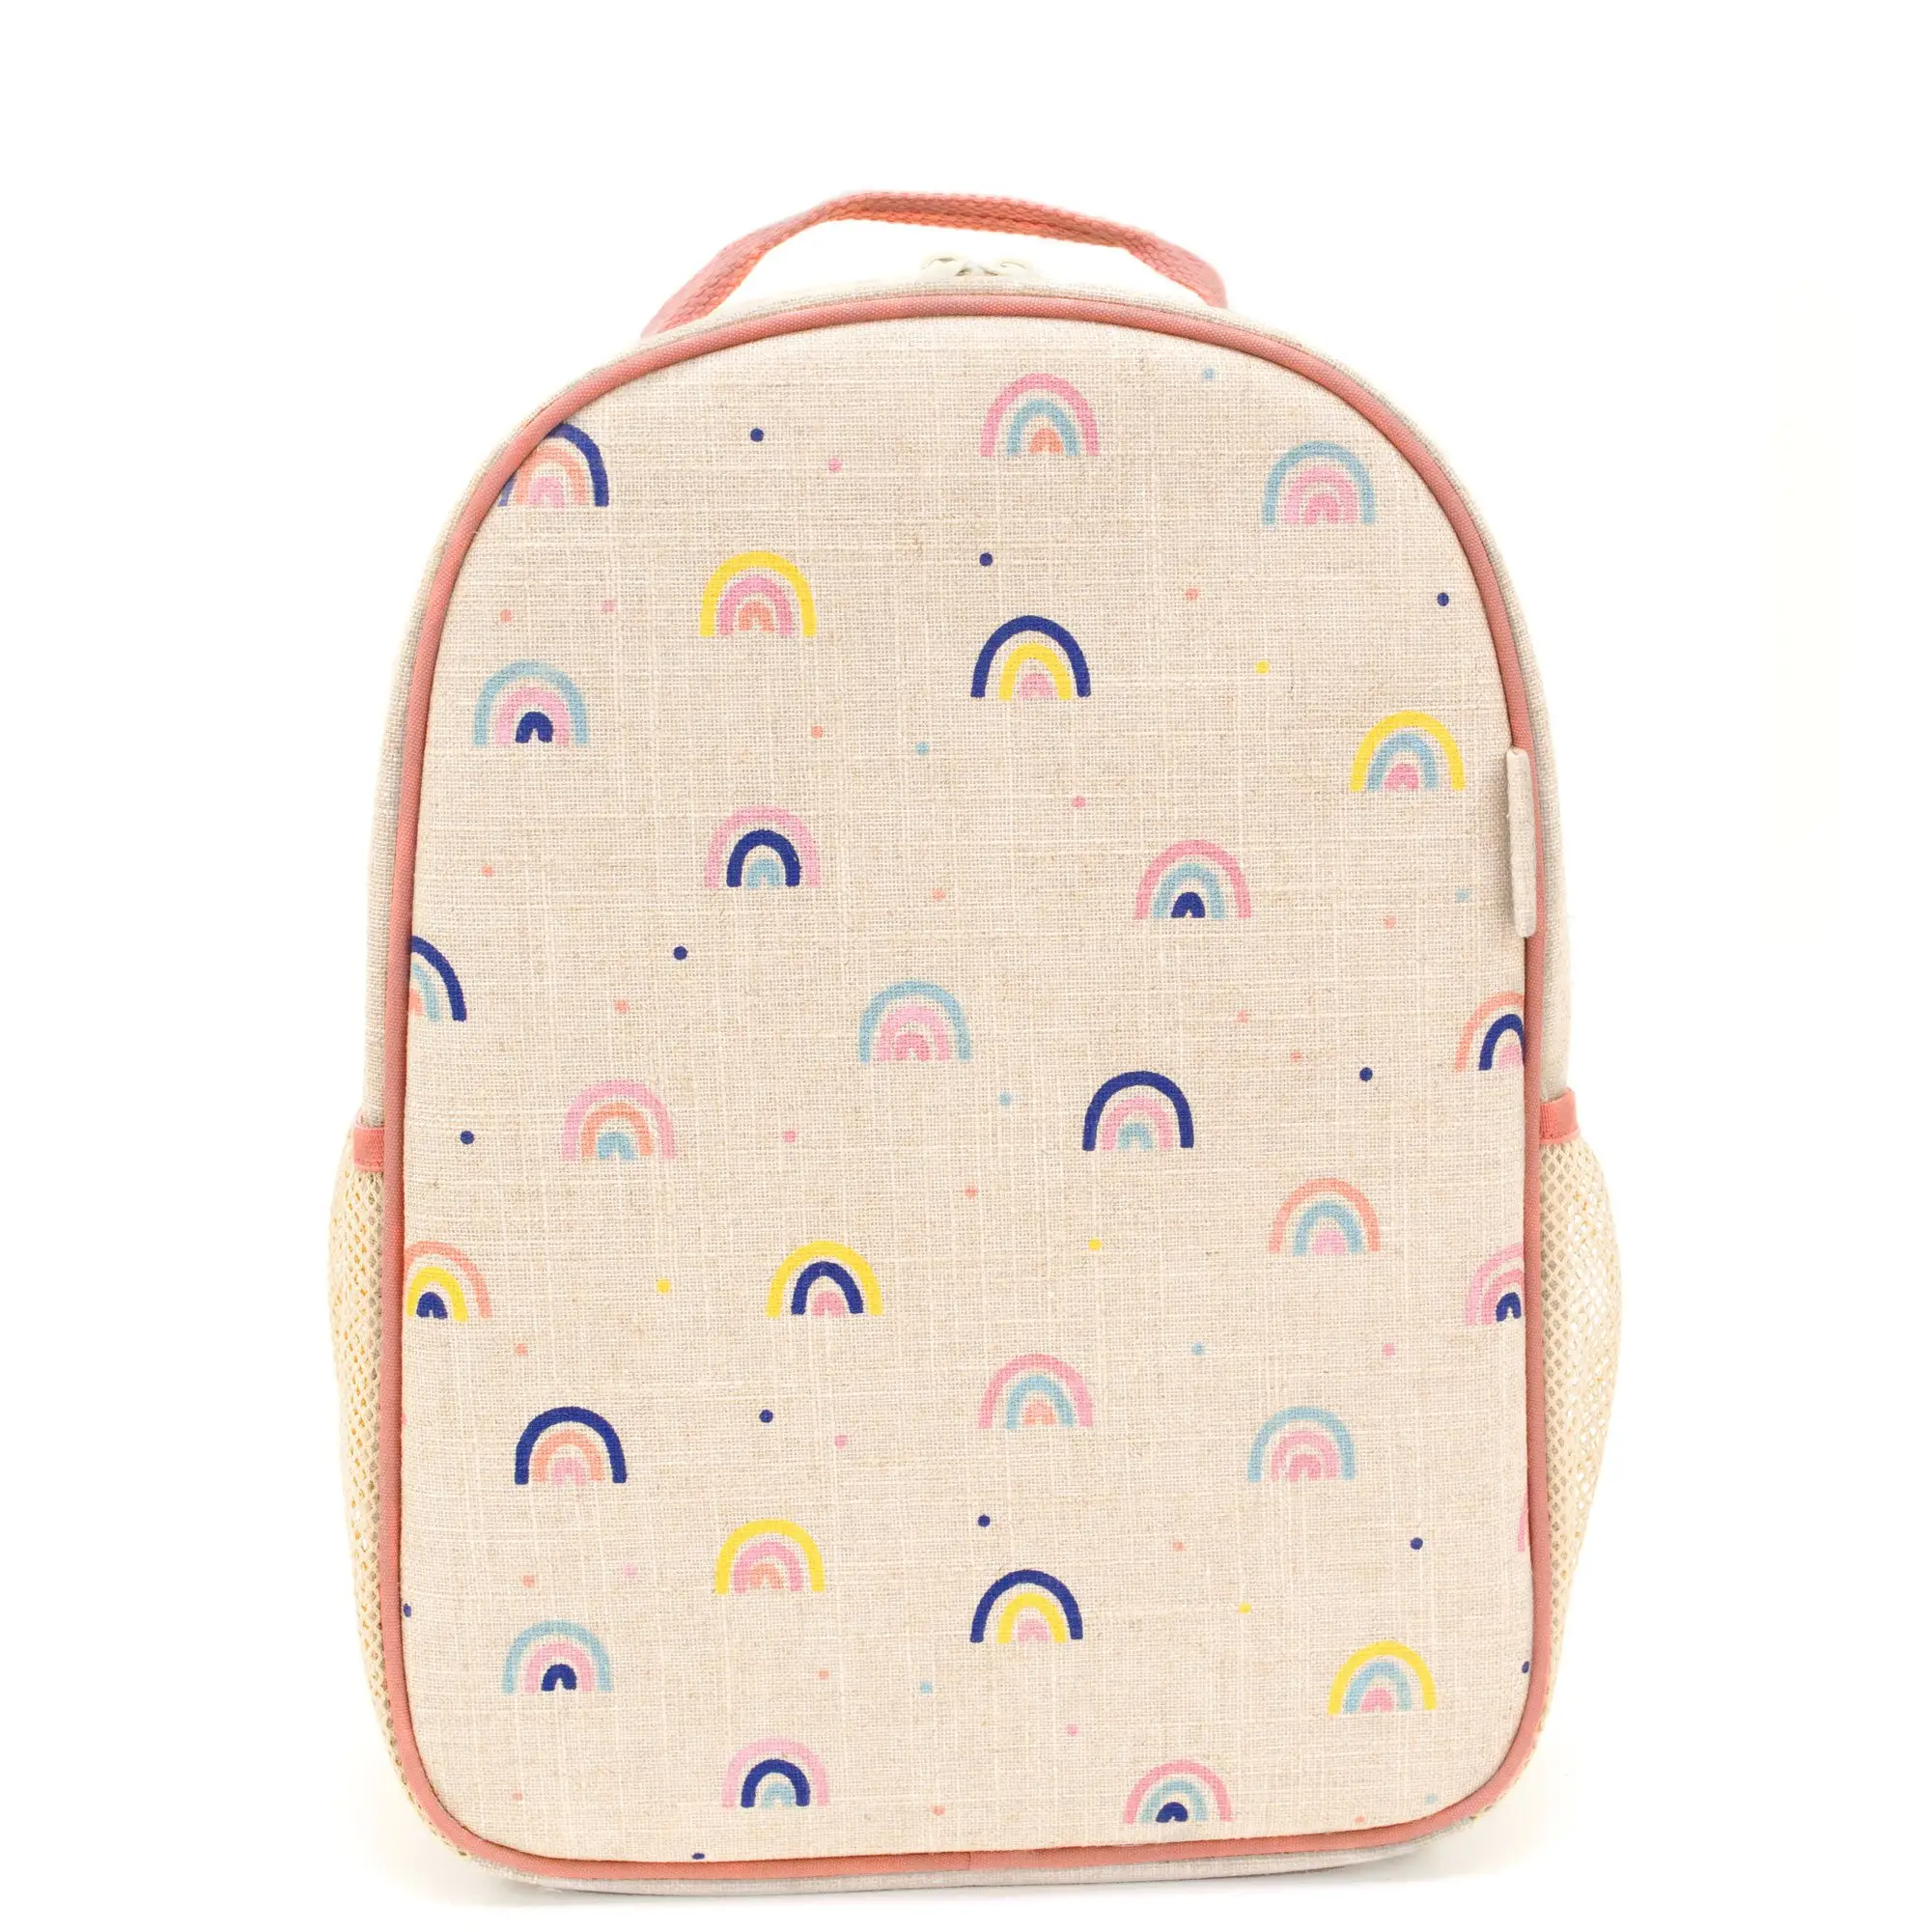 So Young Neo Rainbows Toddler Backpack